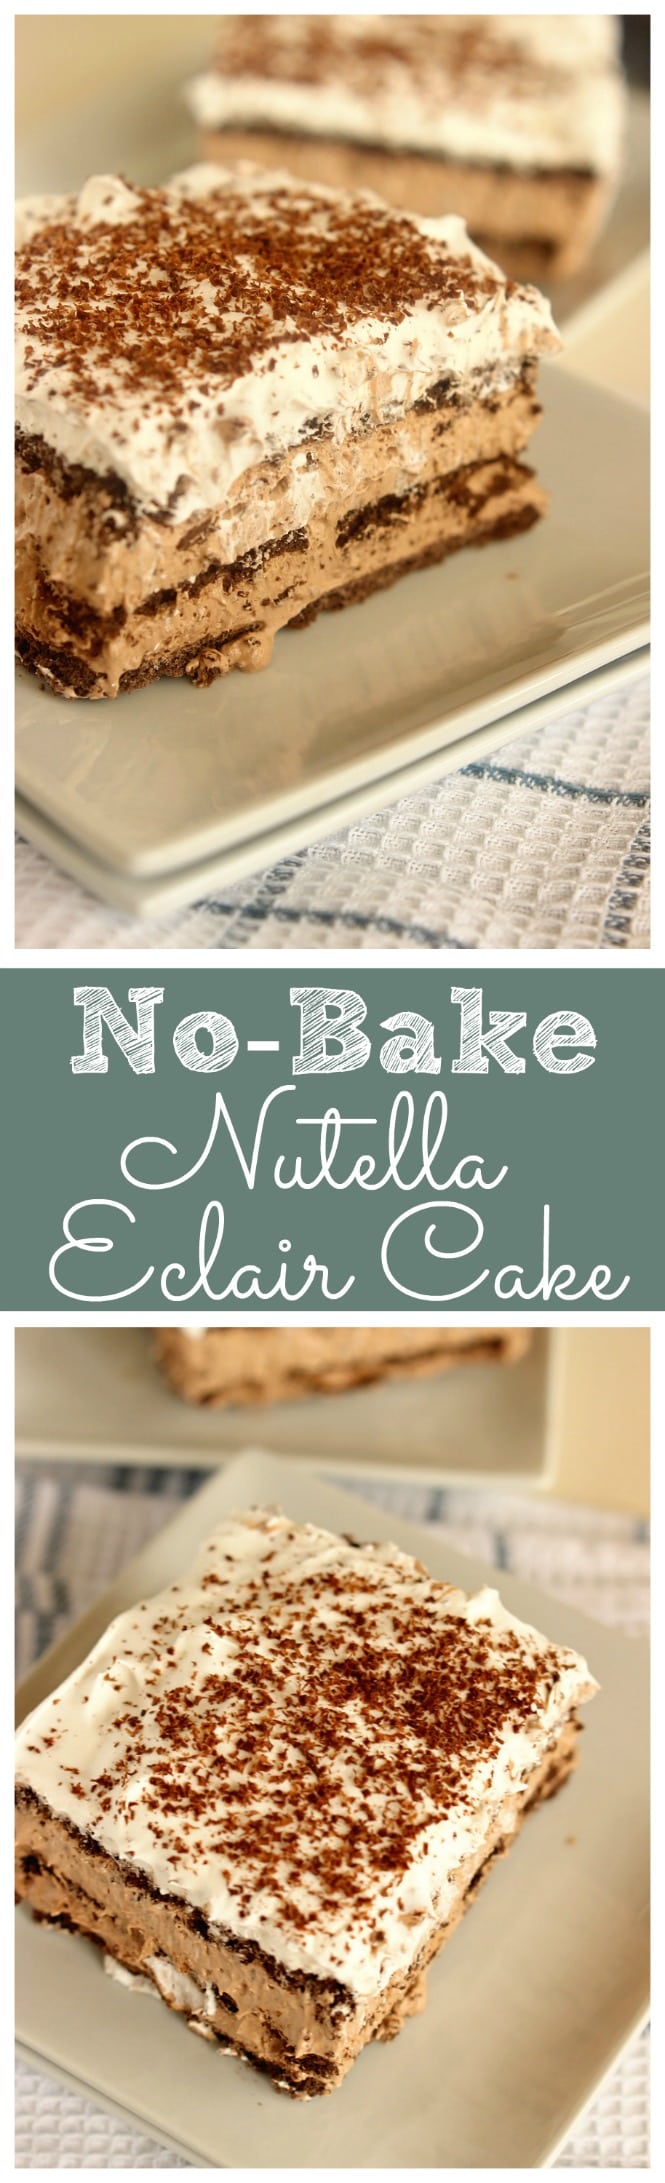 This No-Bake Nutella Eclair Cake is a quick and easy make-ahead dessert idea! Plus it's made with only 4 ingredients!